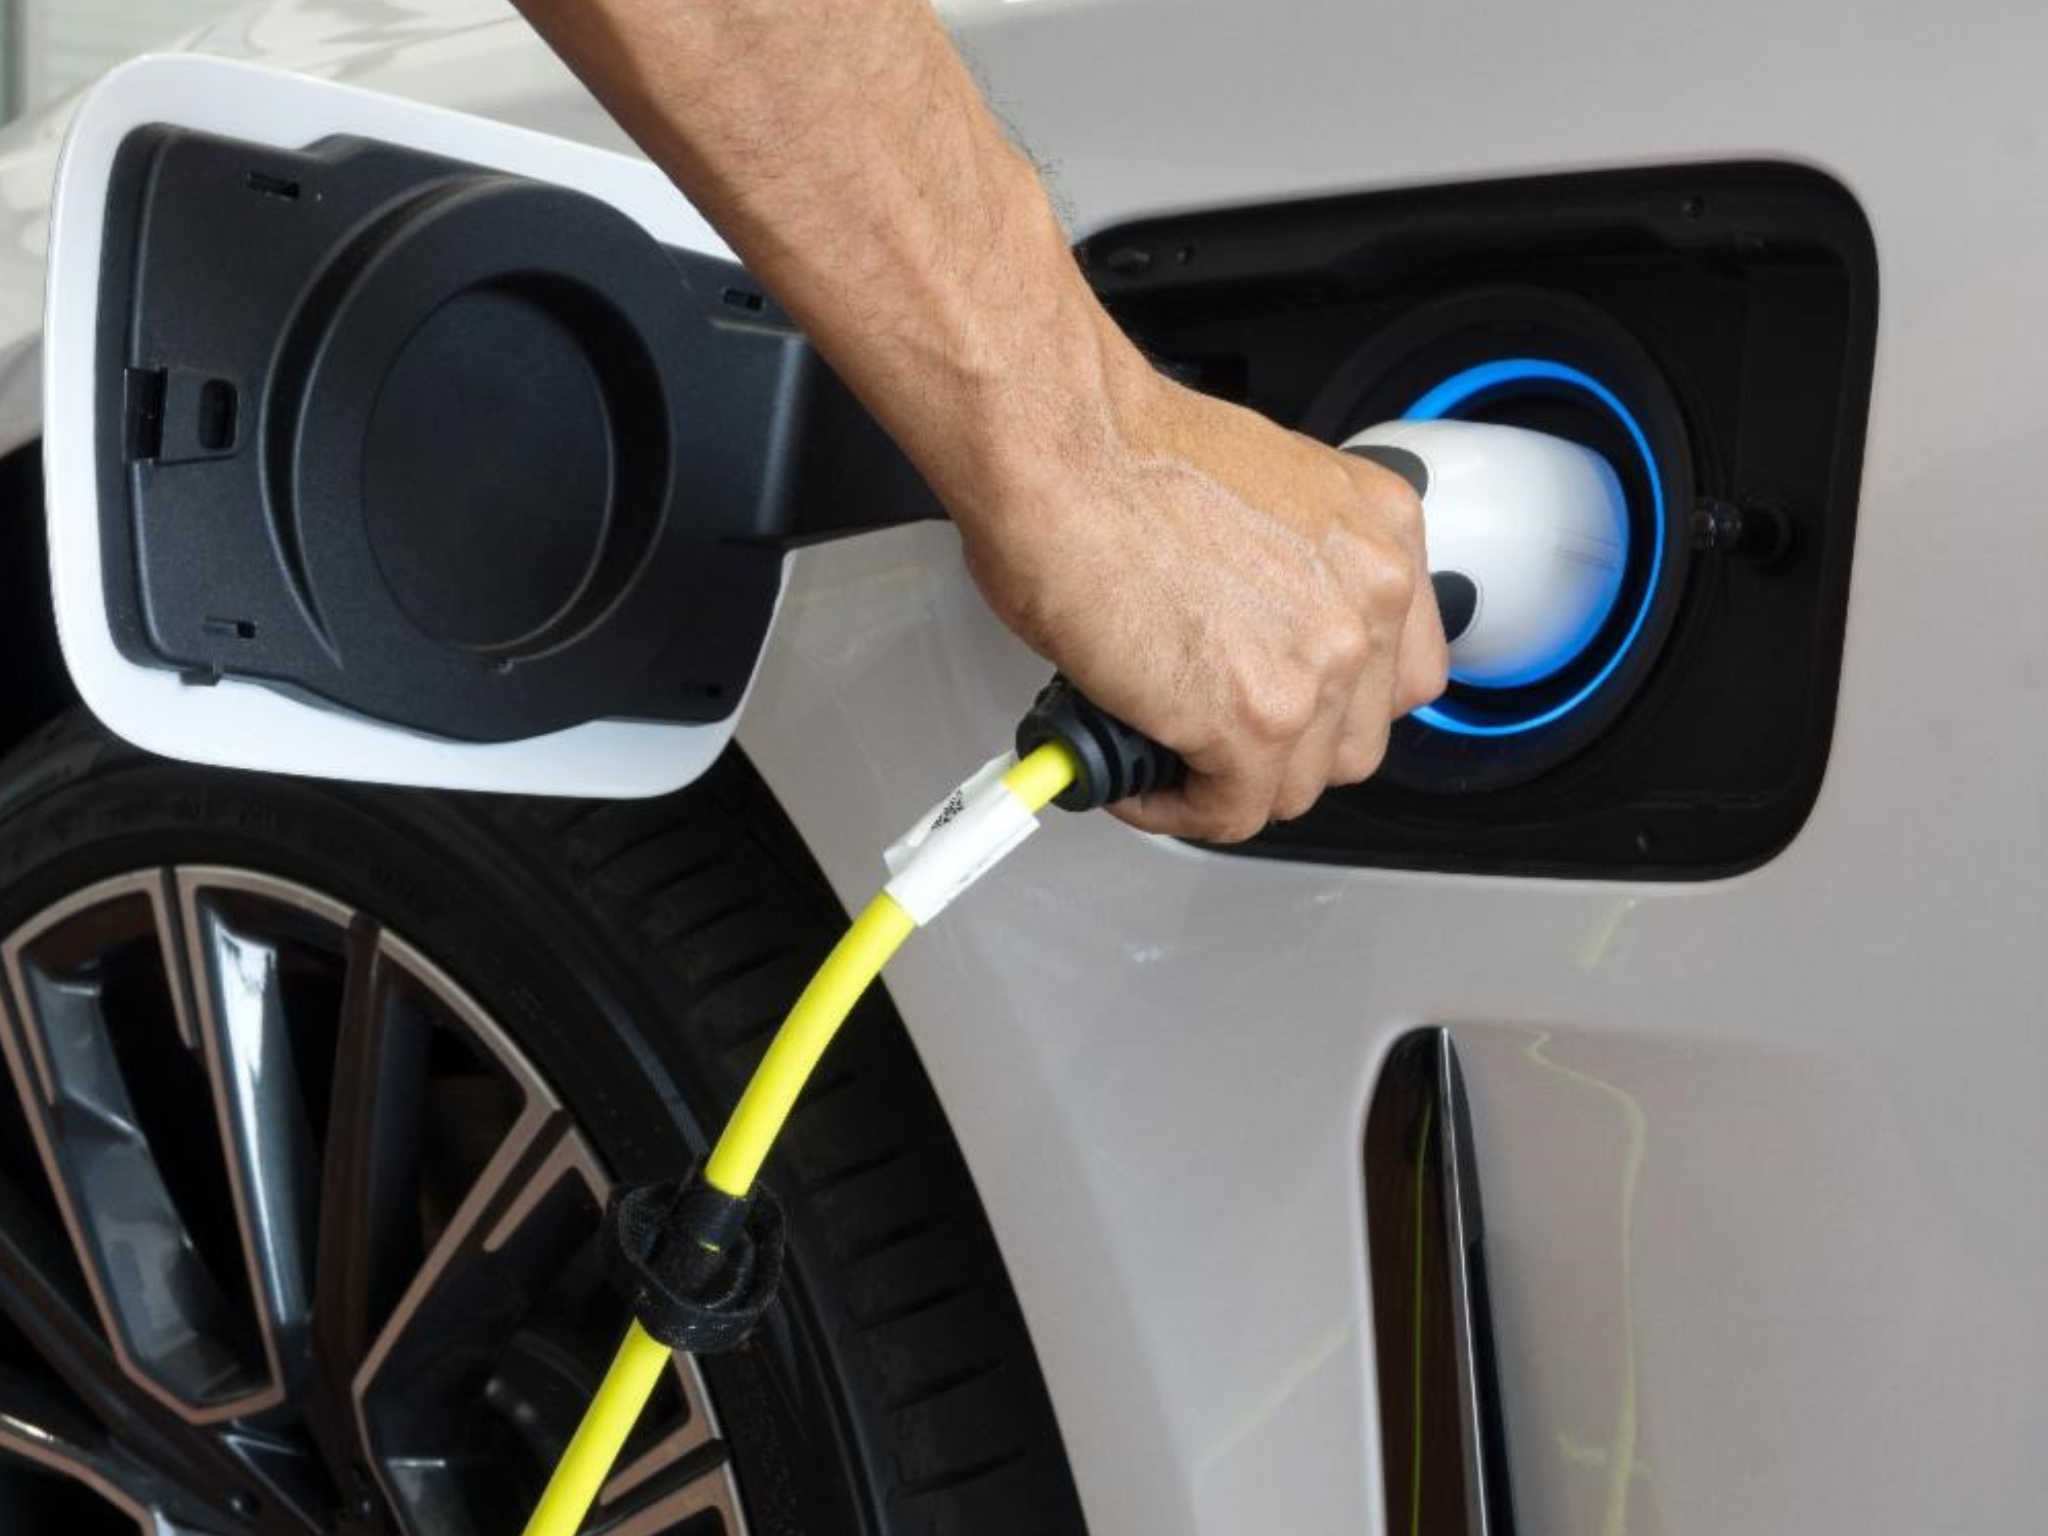 Central Coast Community Energy Launches Electrify Your Ride Program – $4 Million in Incentives for Electric Vehicles and Chargers To Accelerate Clean Transportation